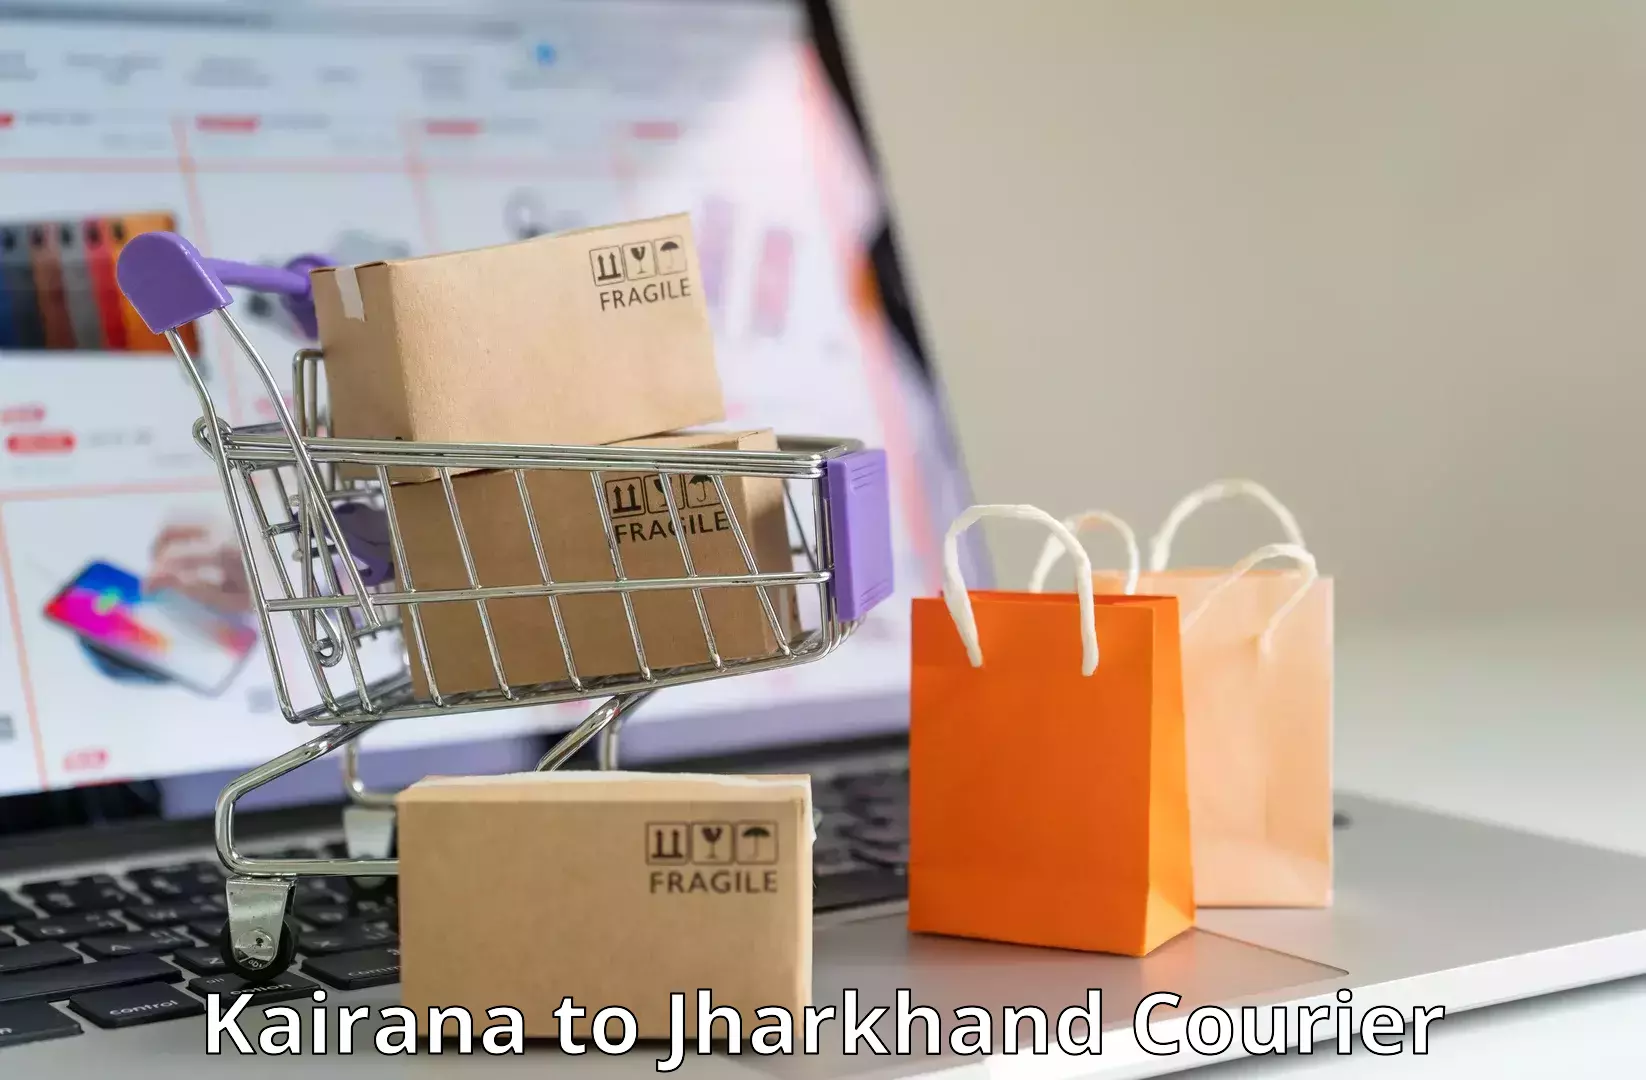 Small parcel delivery in Kairana to Jharkhand